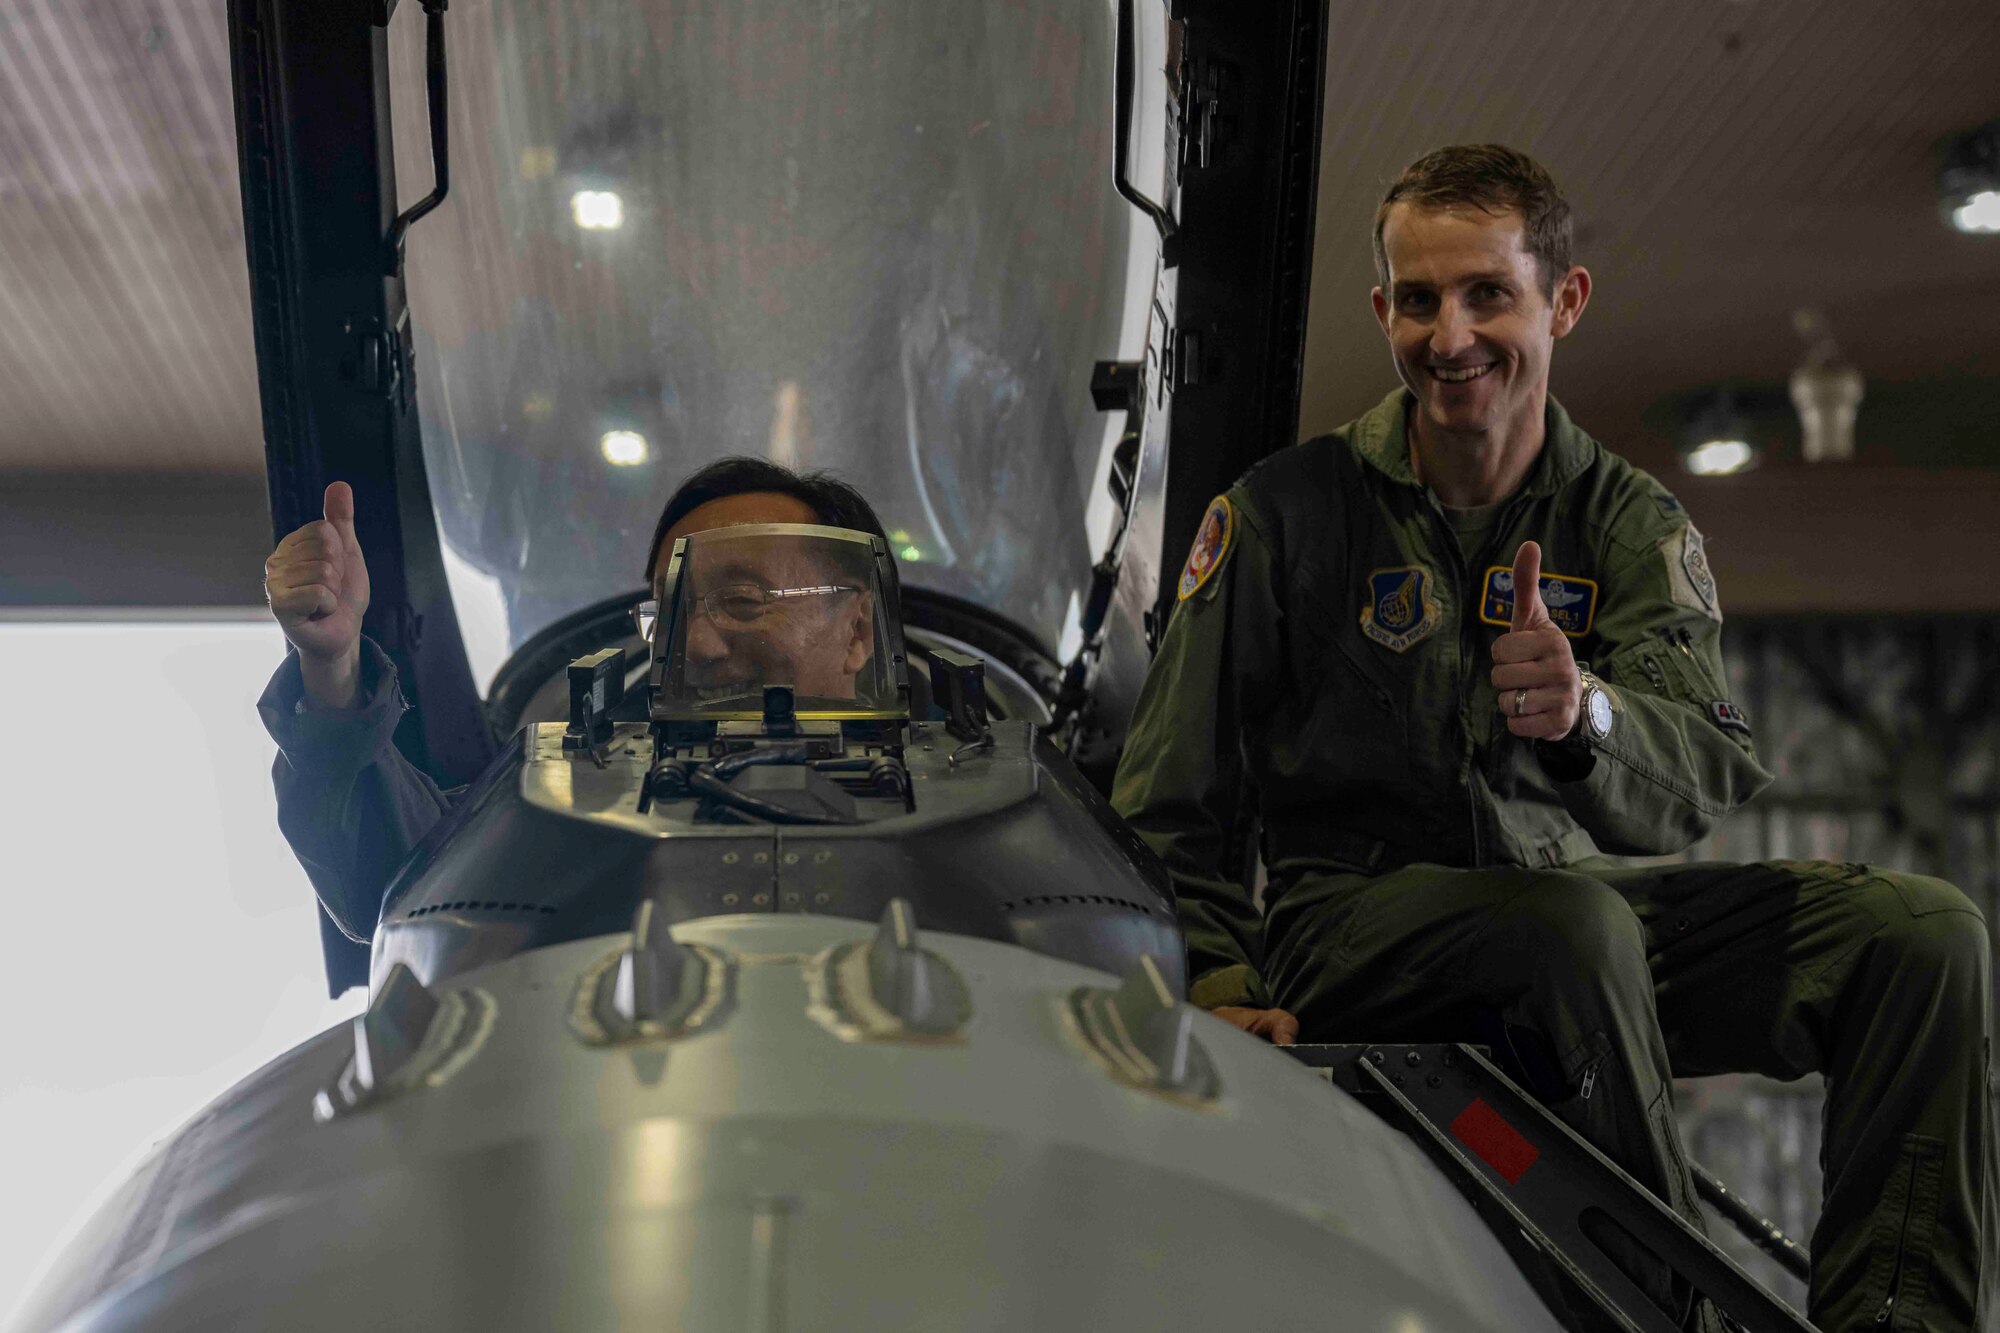 Two men give a thumbs up as they look inside the cockpit of a fighter jet in a hangar at Misawa Air Base.